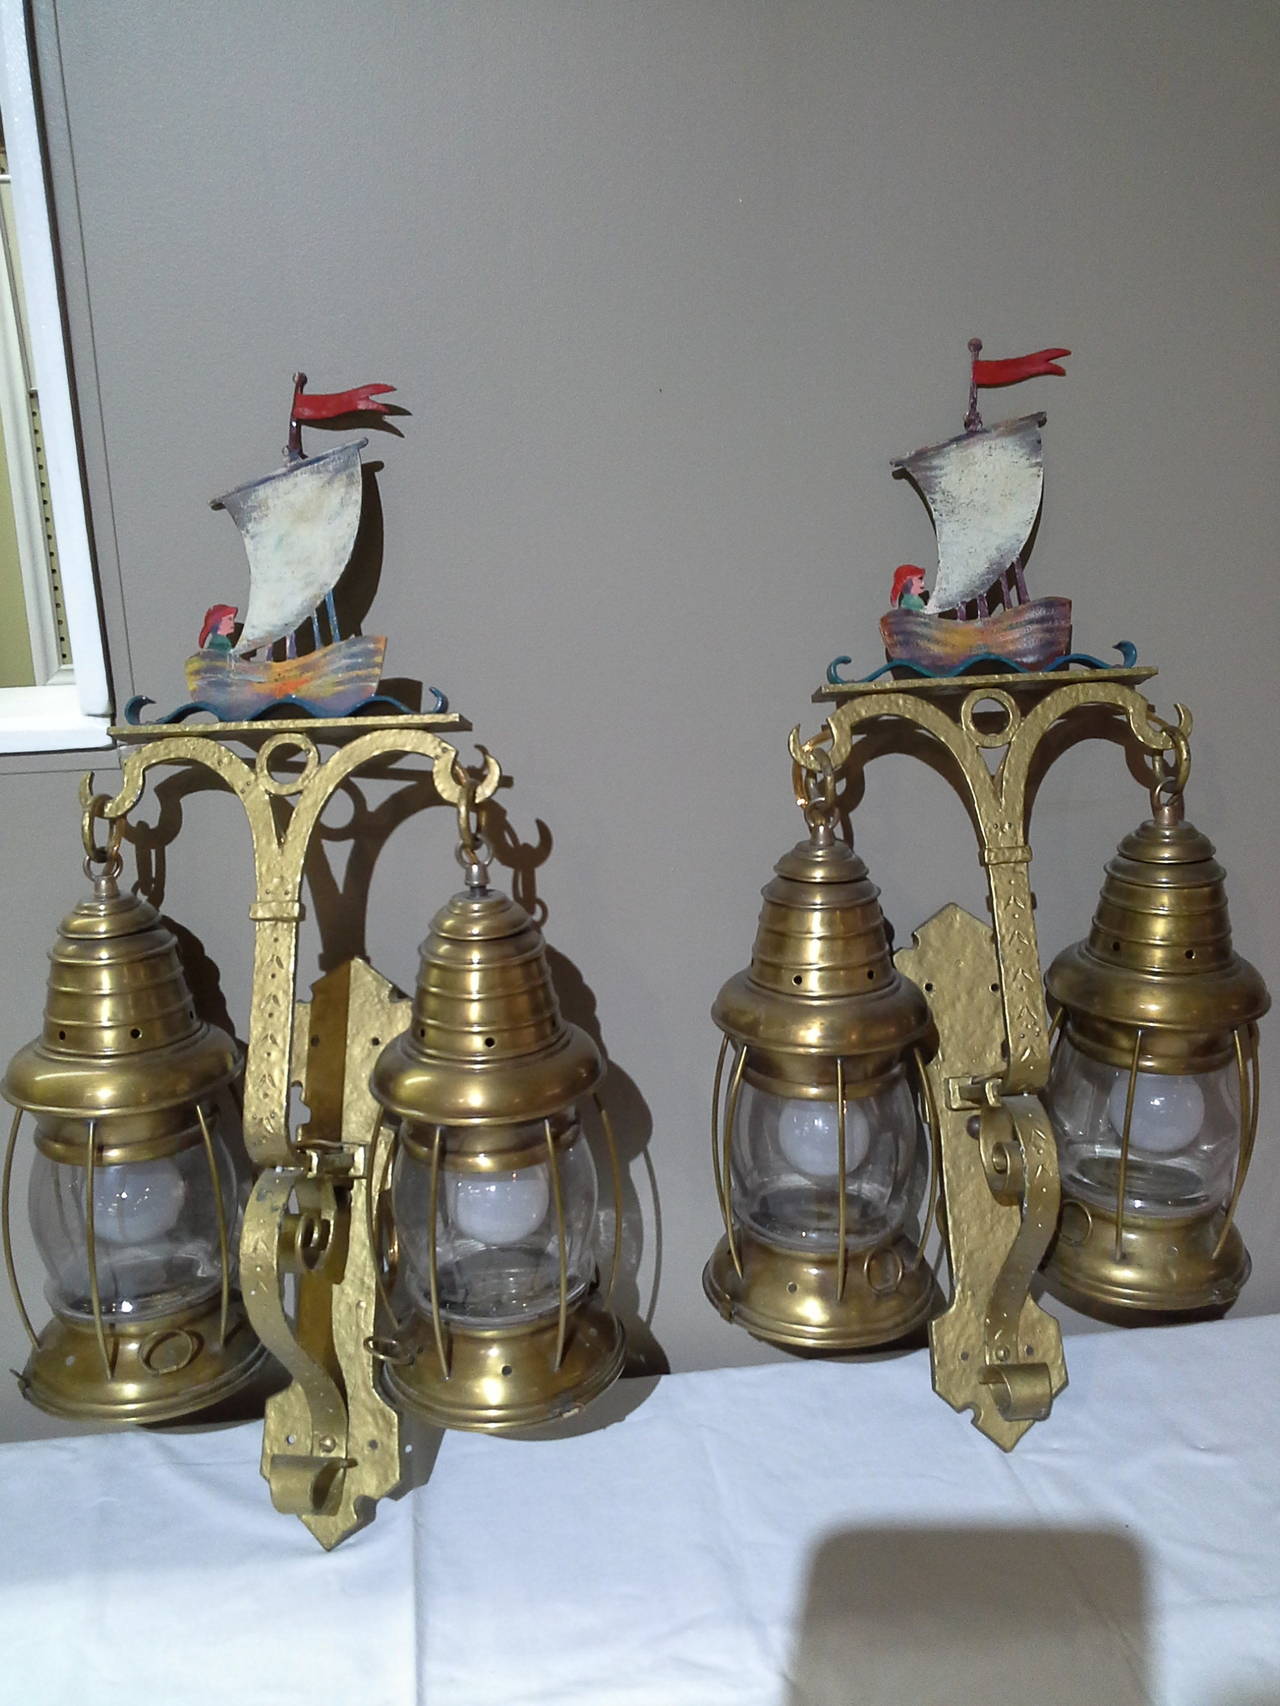 North American Nautical Lantern Cast Iron Wall Sconces with Sailboat Painted Tops